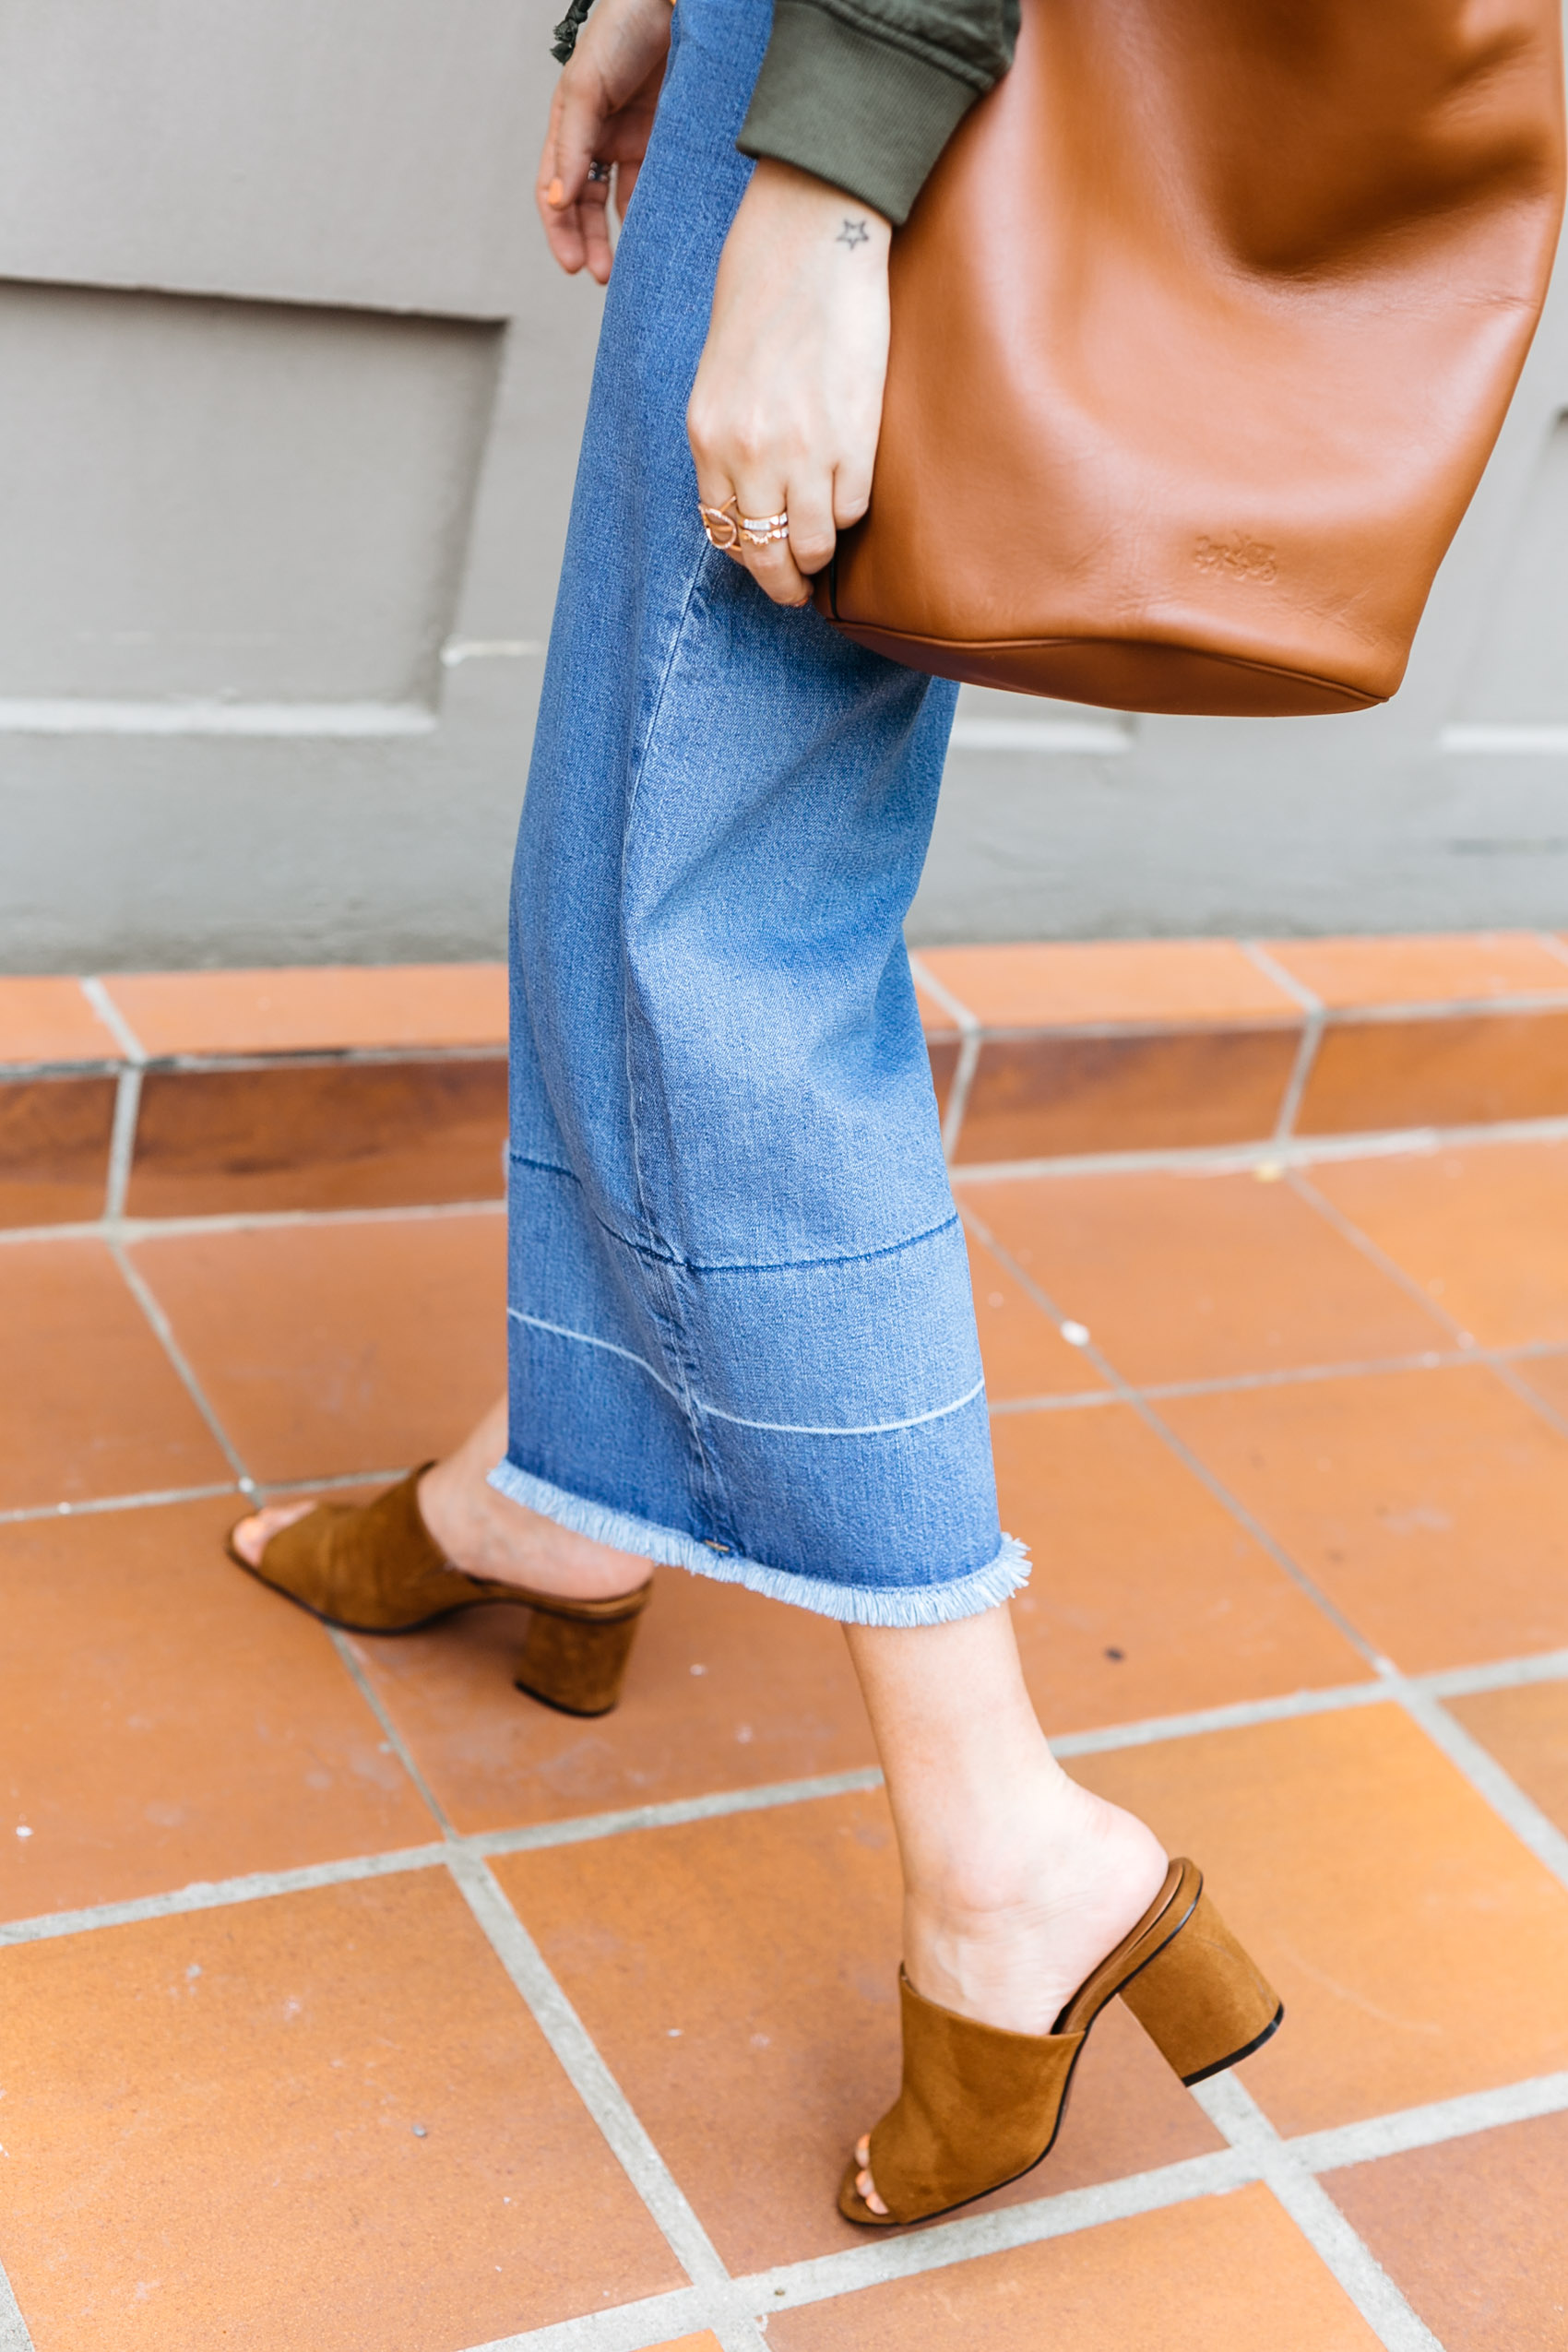 Maristella's outfit details: denim culottes with raw hem, suede mules from Zara in brown, tan leather Coach bucket bag